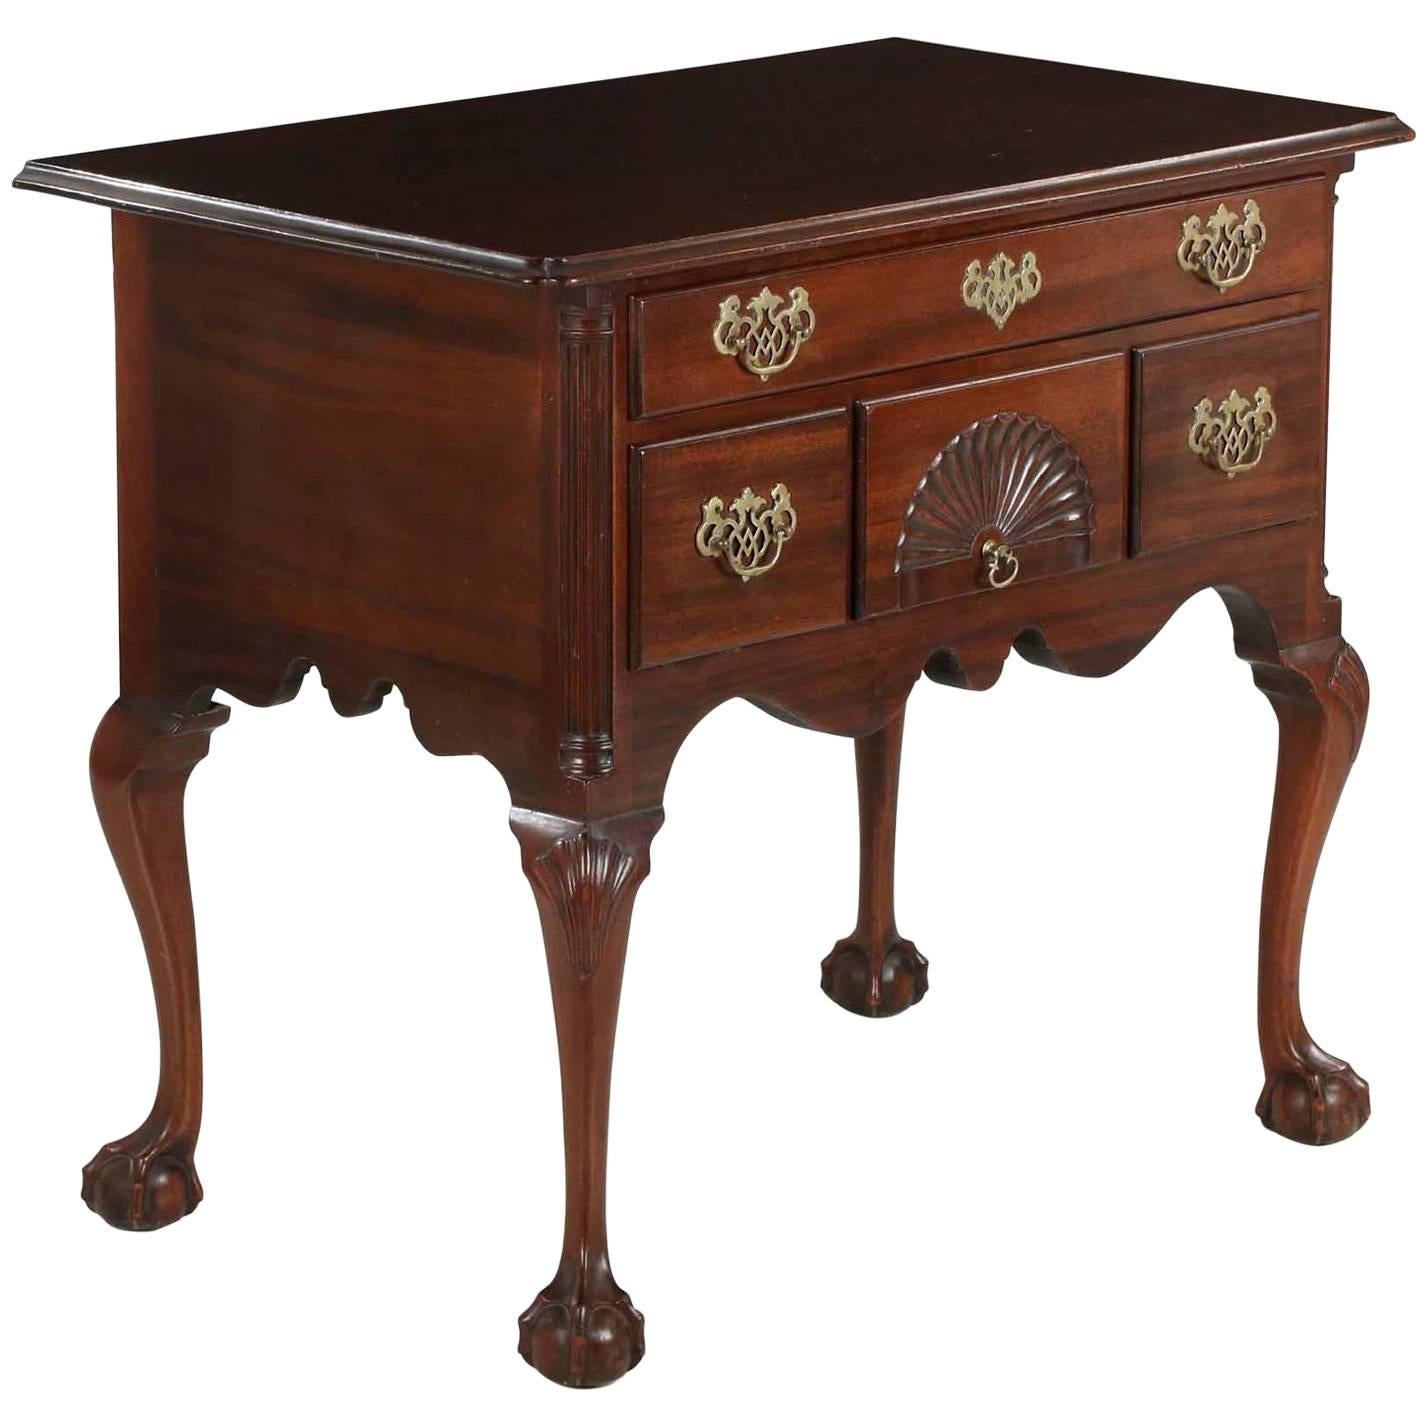 American Chippendale Style Mahogany Lowboy in the Connecticut Taste